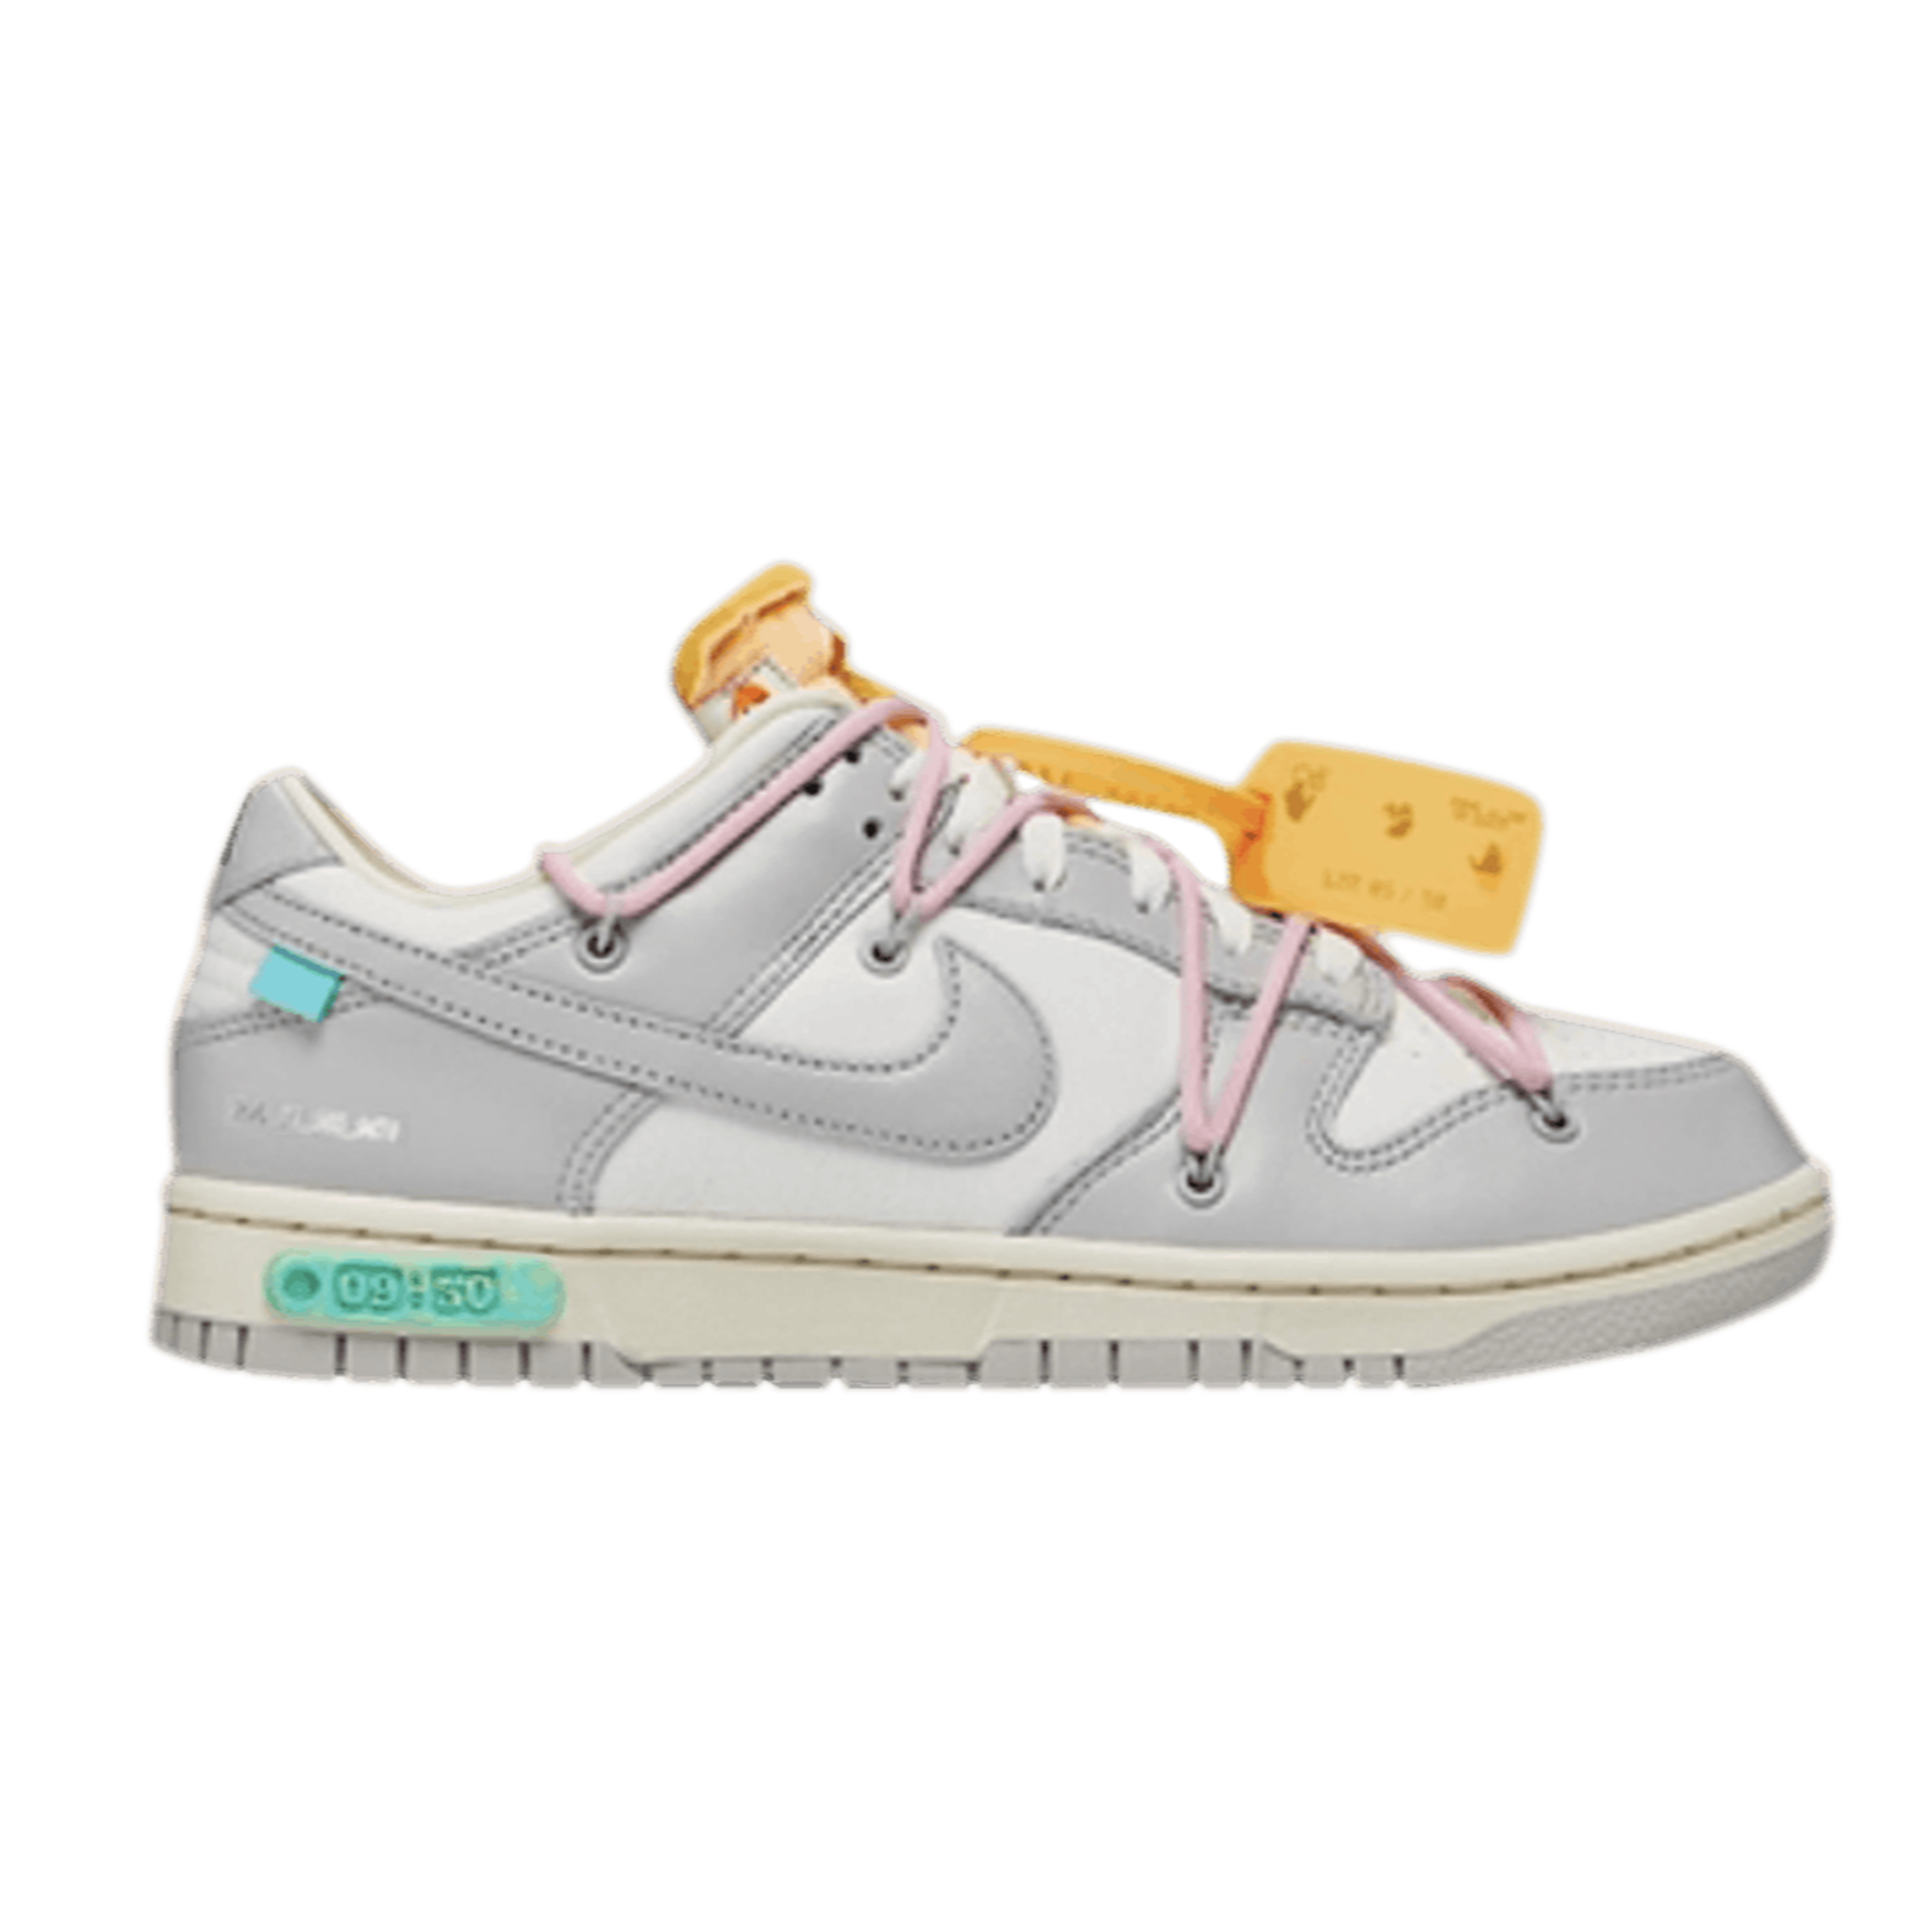 Nike Off-White x Dunk Low 'Dear Summer - Lot 09 of 50'